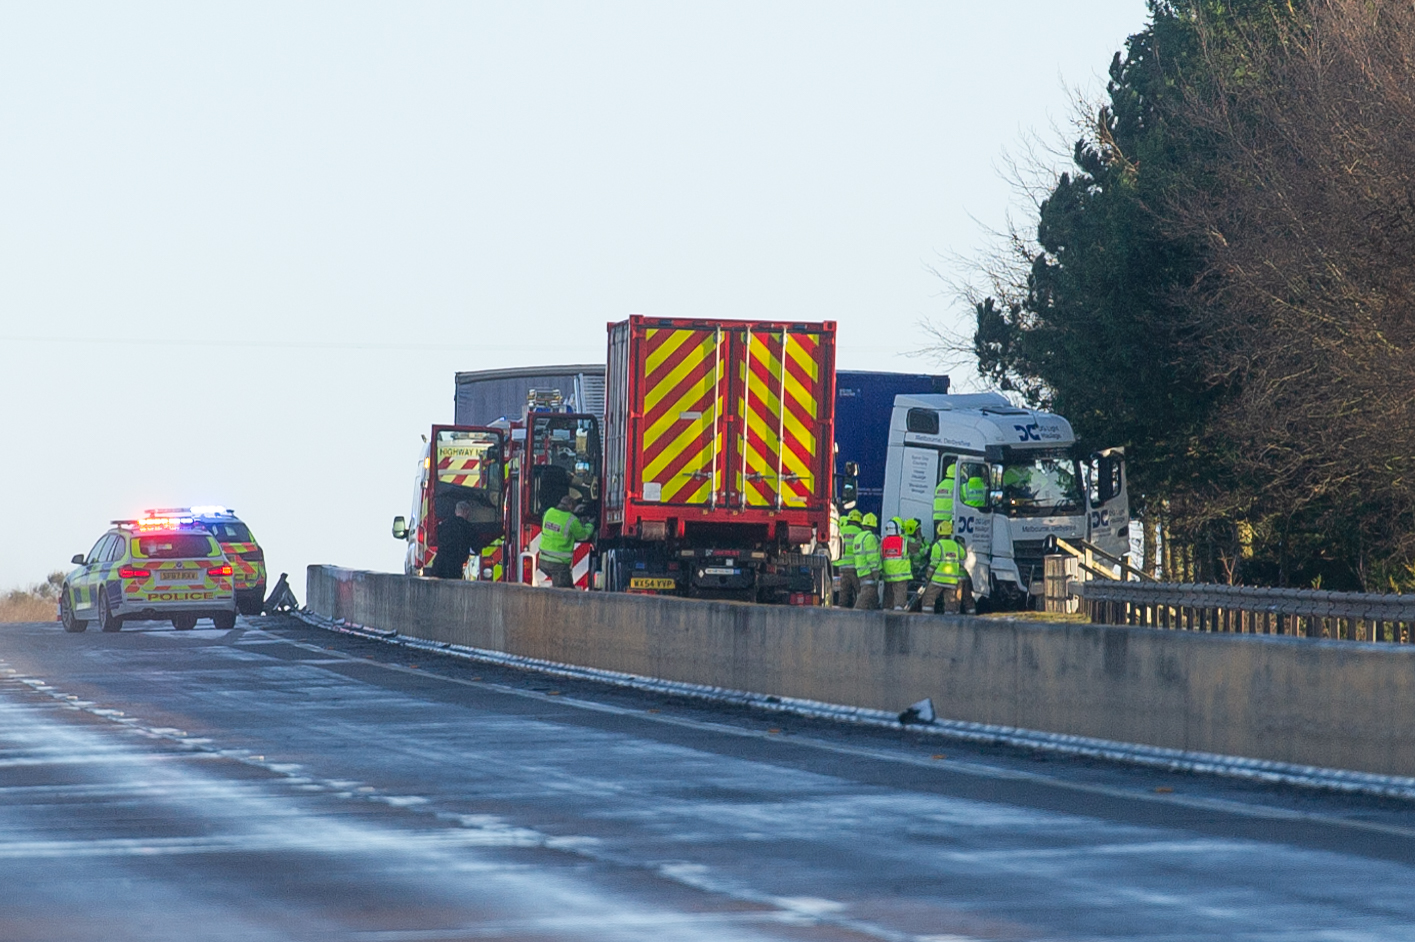 The scene of the RTC which saw a lorry jackknife and block the southbound carriageway of the A90 at Brechin.